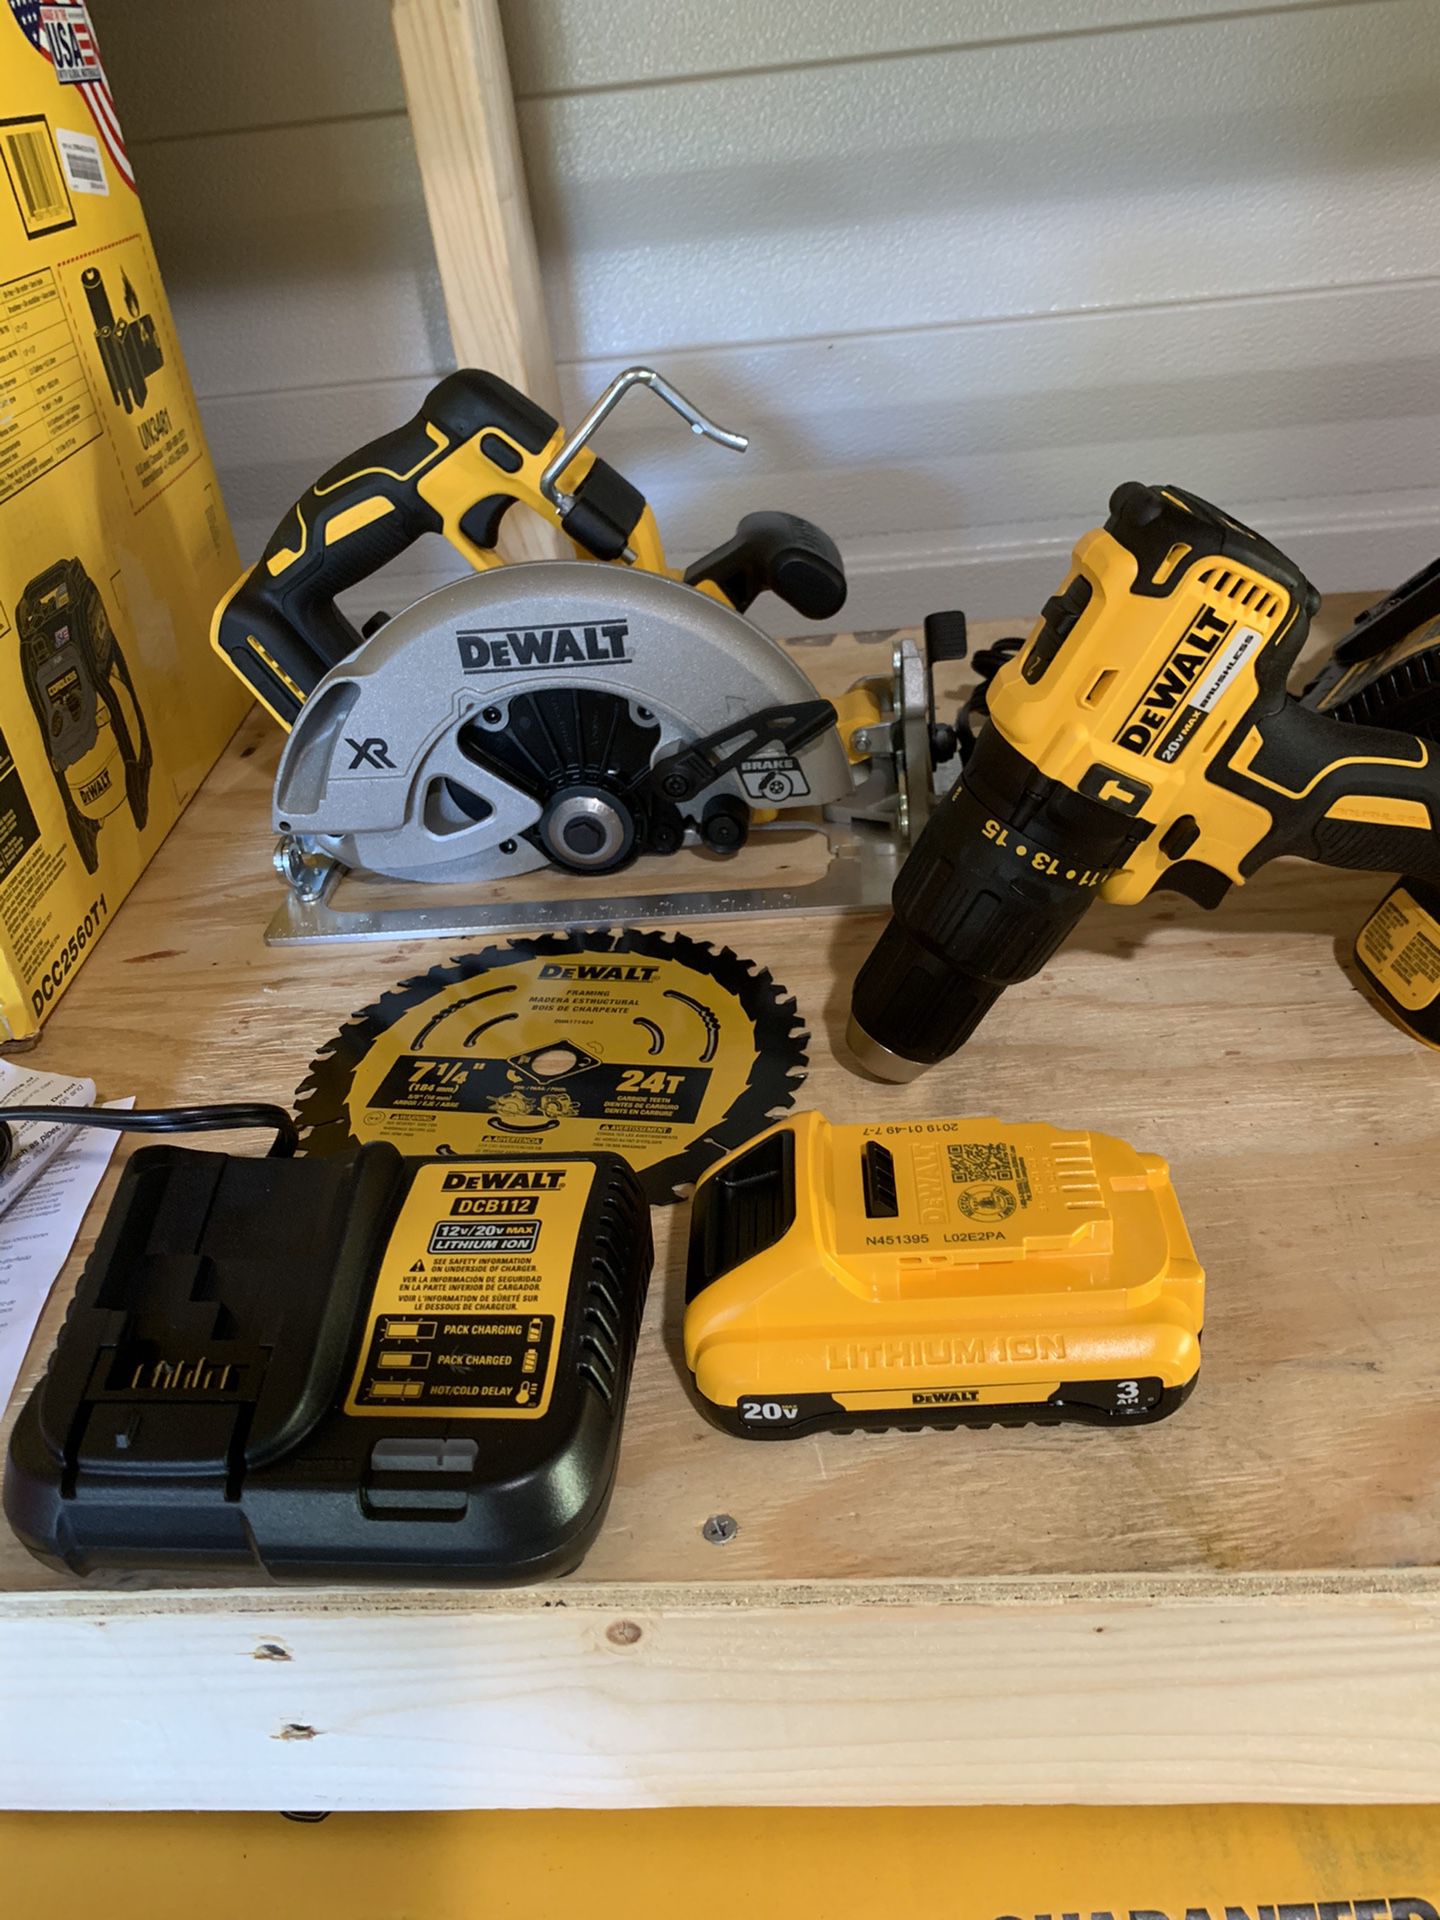 Brand new dewalt brushless 7-1/2 circular saw and hammer drill 1 battery and charger not negotiable